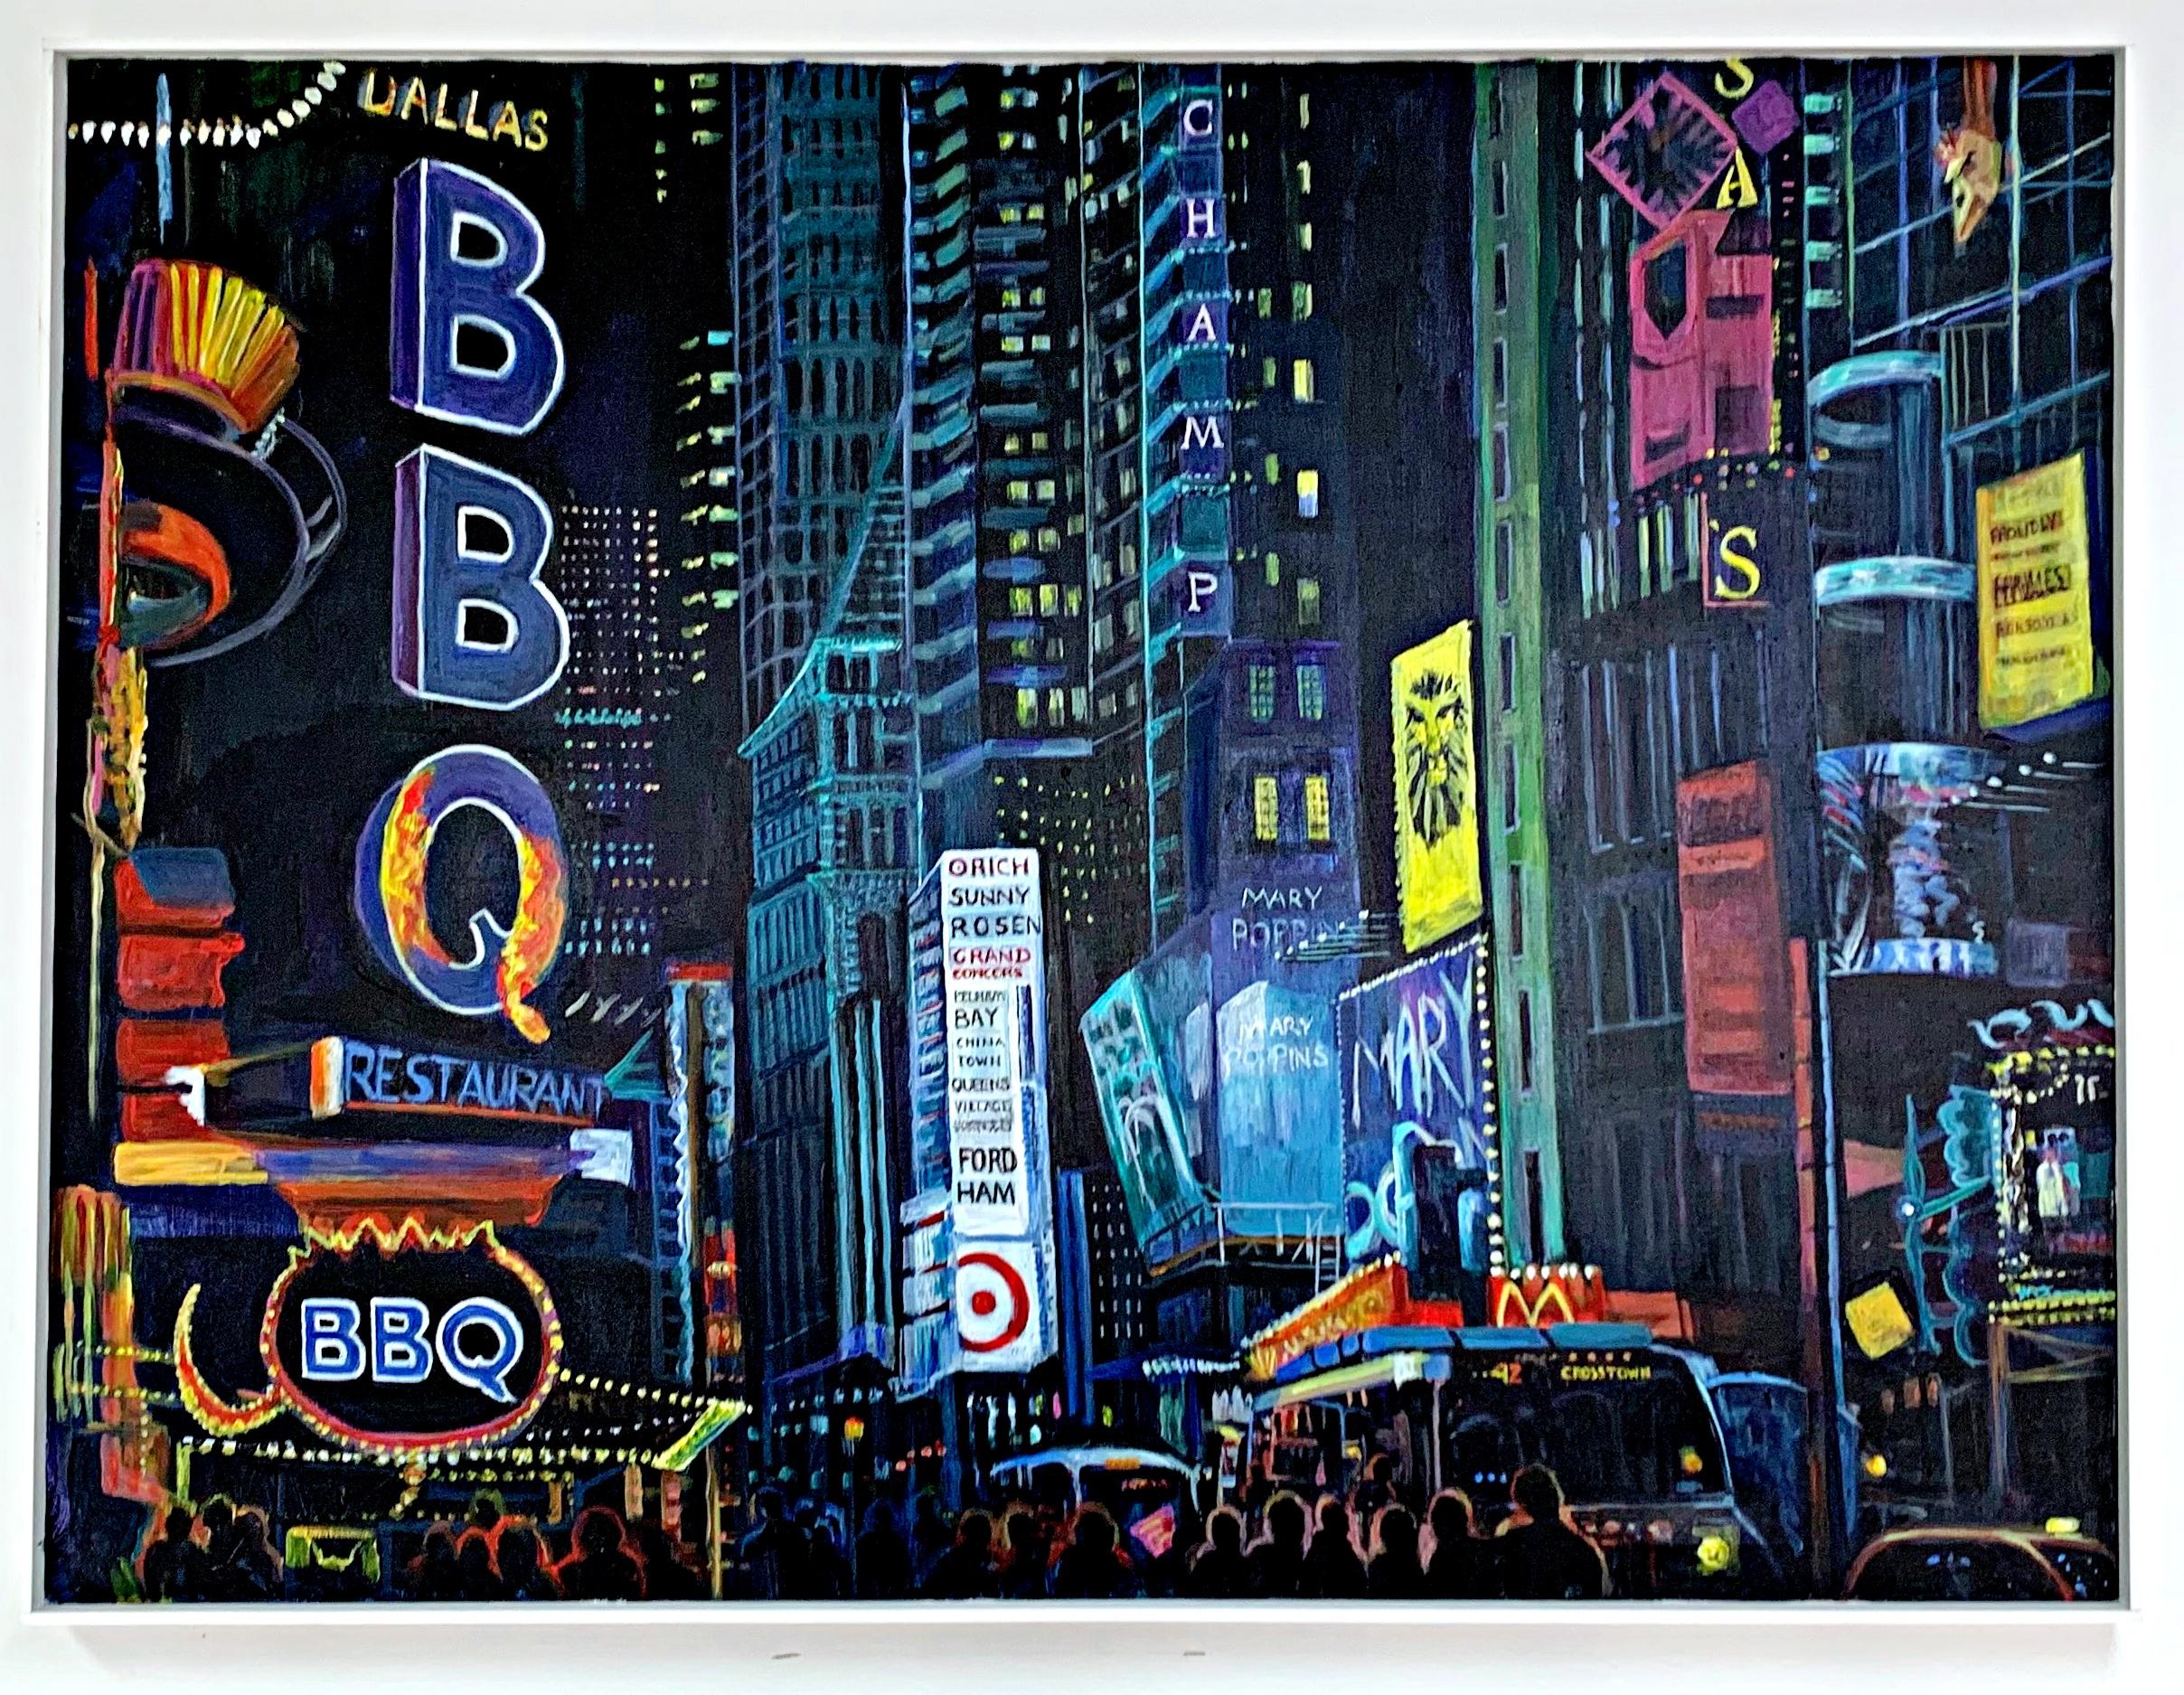 Times Square IX (Dallas BBQ) - Painting by Thelma Appel